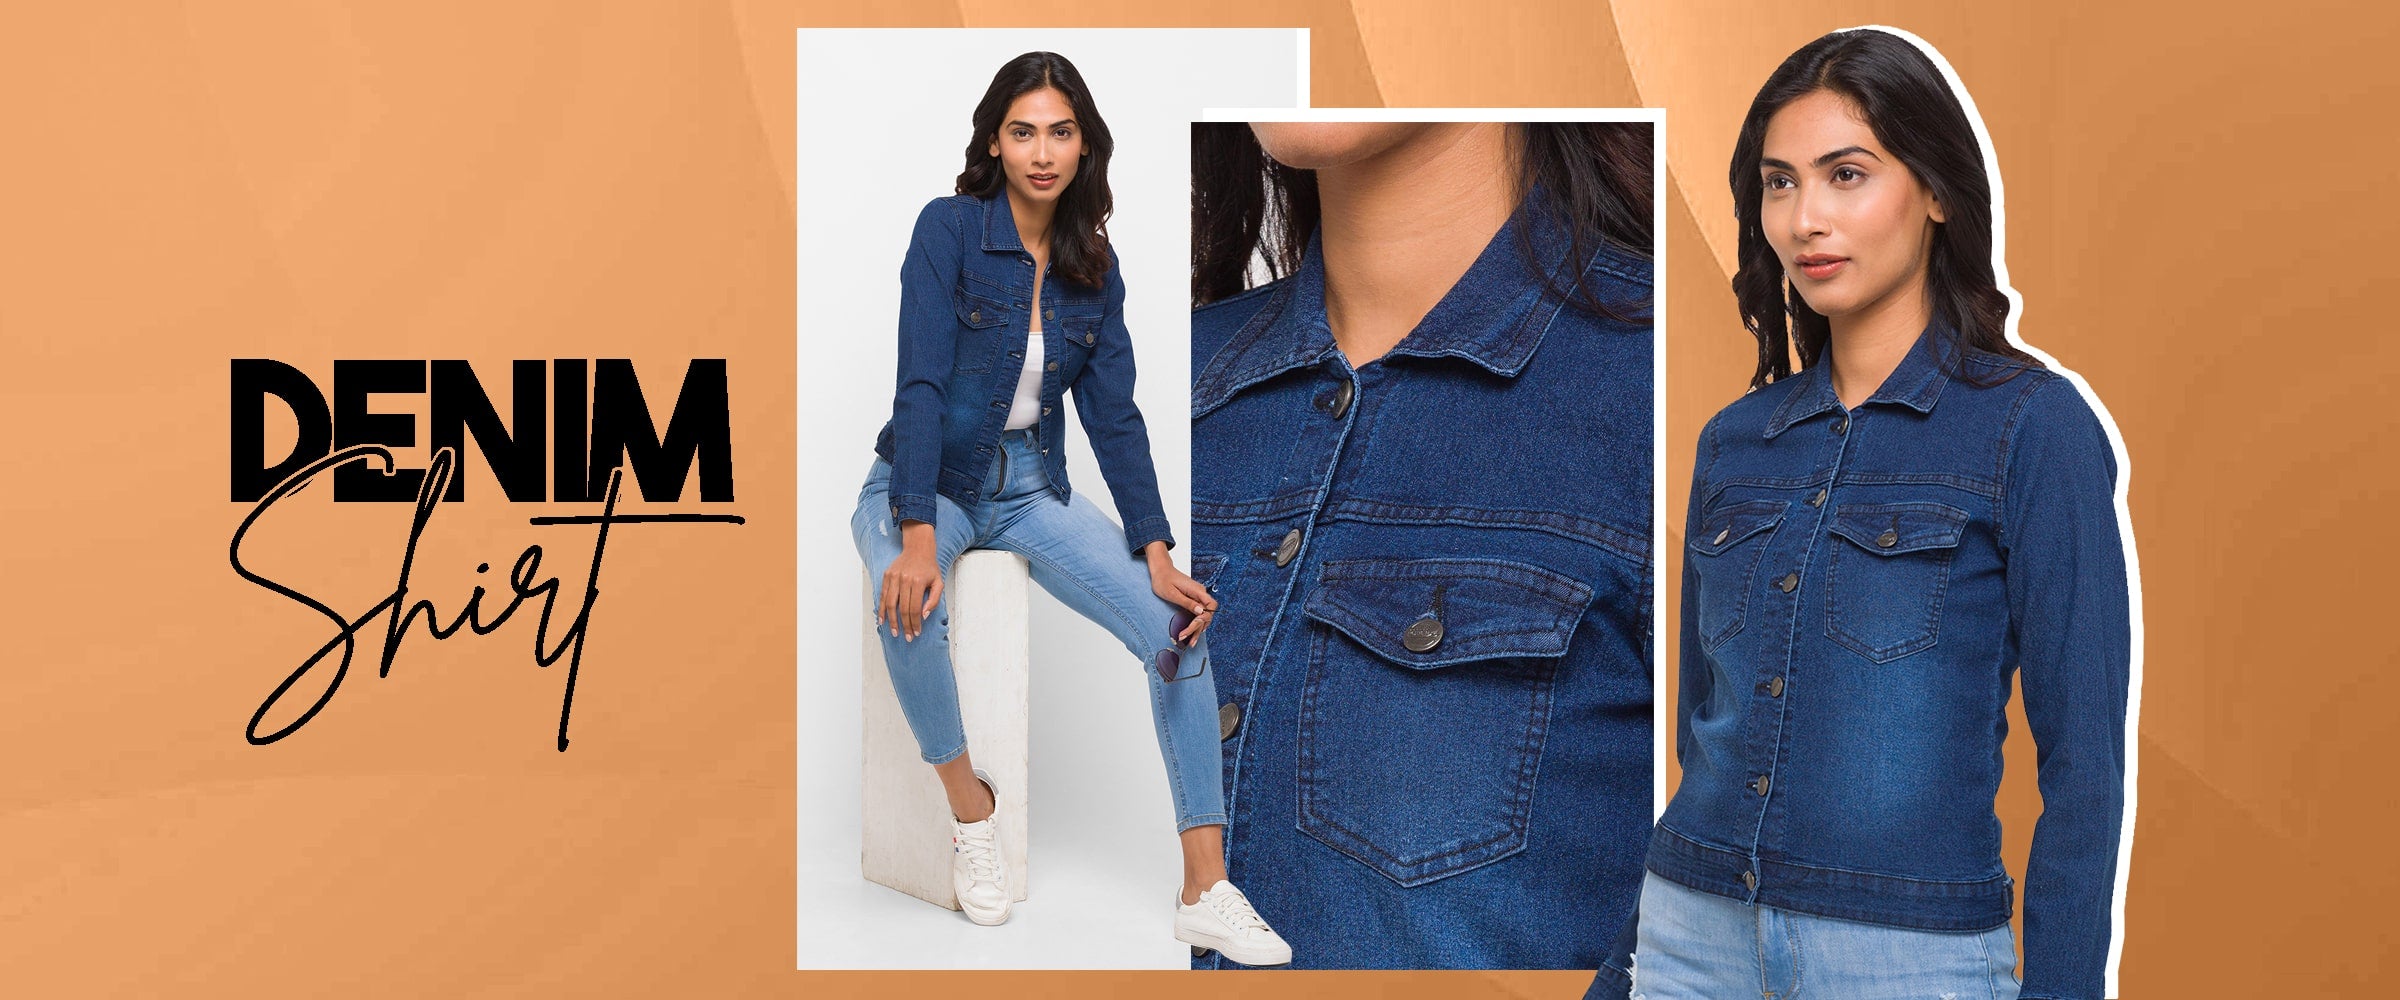 12 Tips on How to Style a Denim Shirt with Regular fit Jeans for women